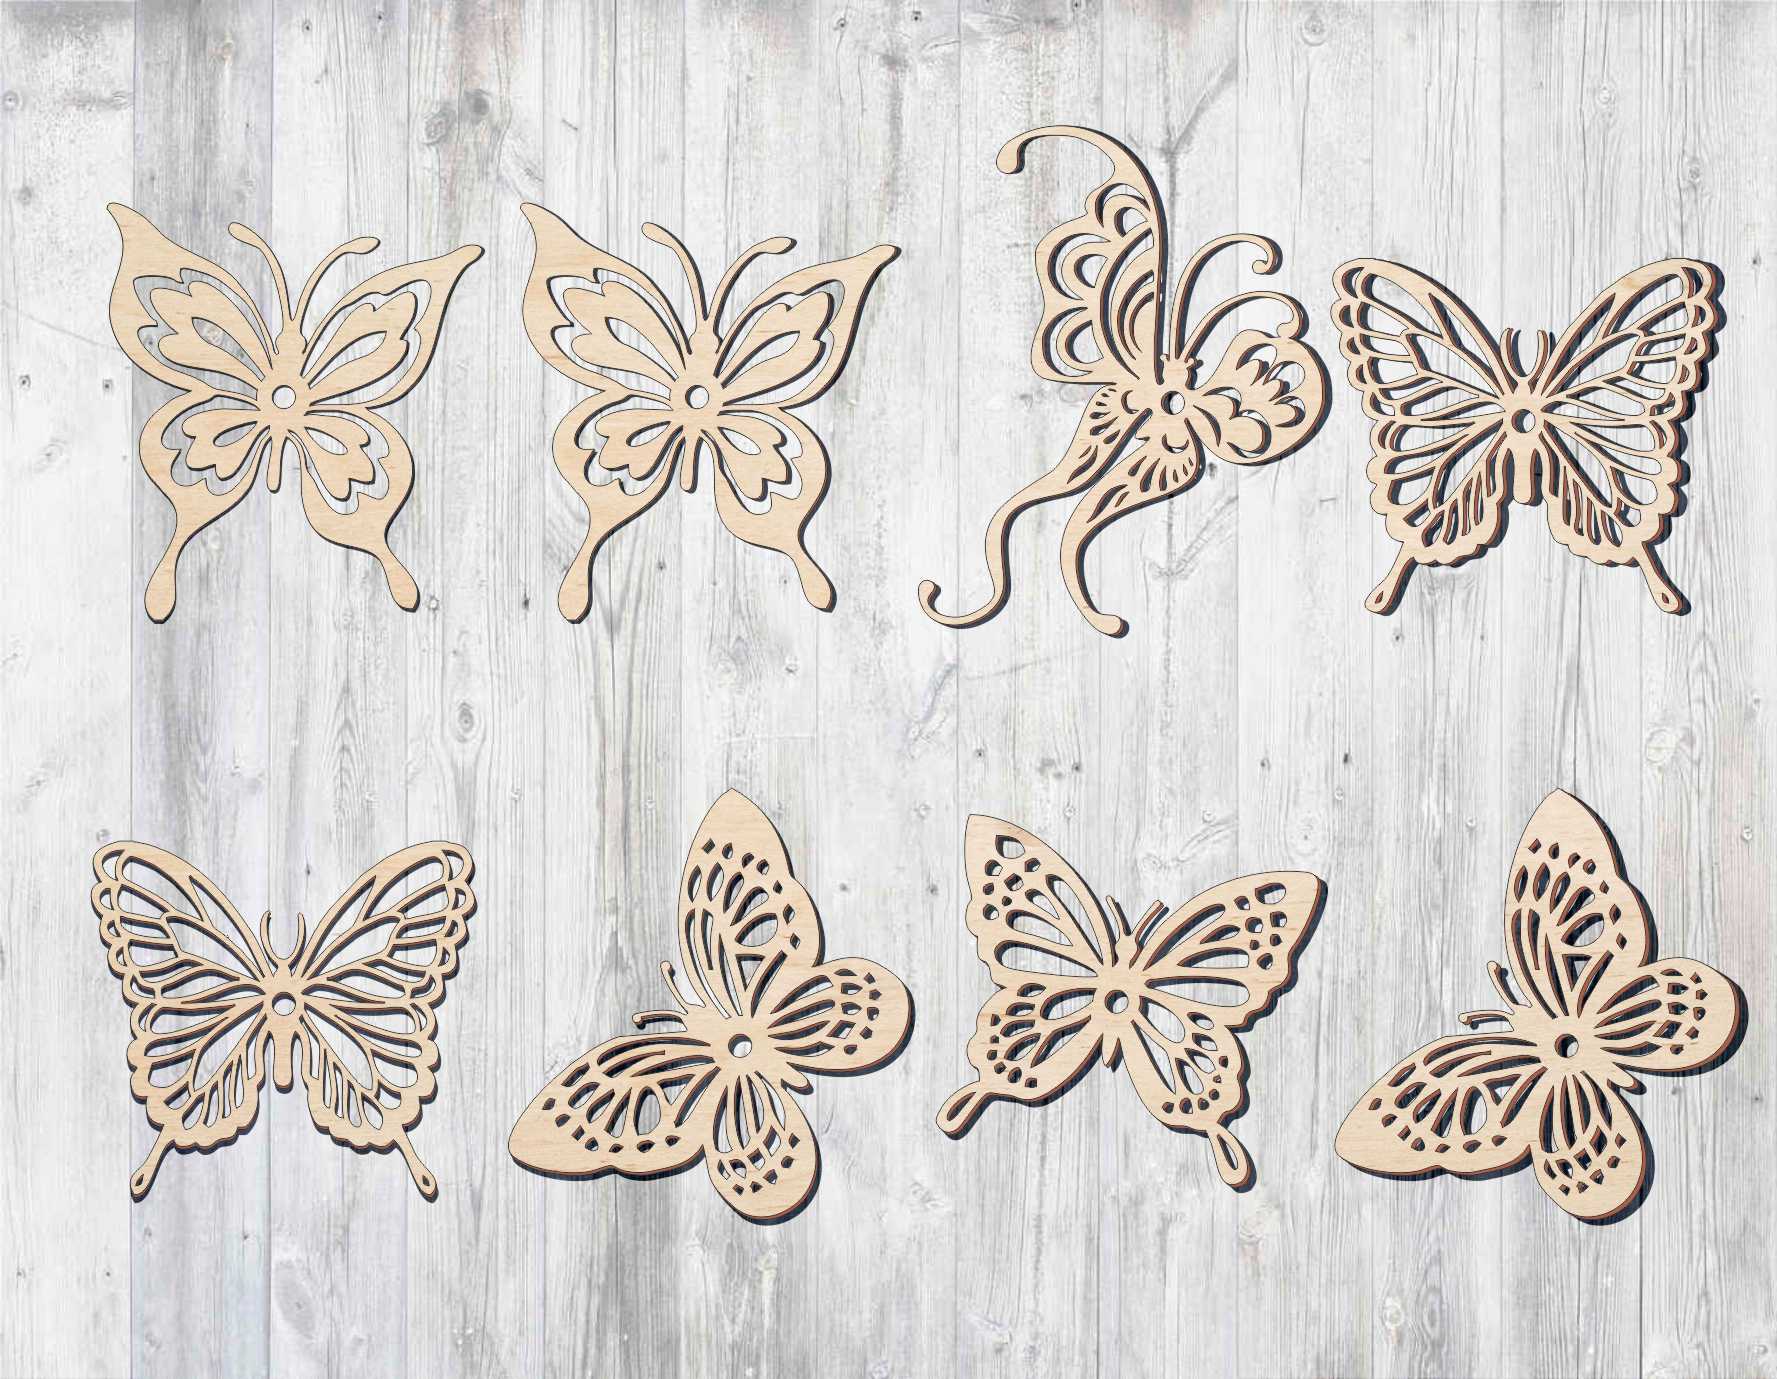 Download Laser Cut Wooden Butterfly Cut Outs Free Vector - Designs ...